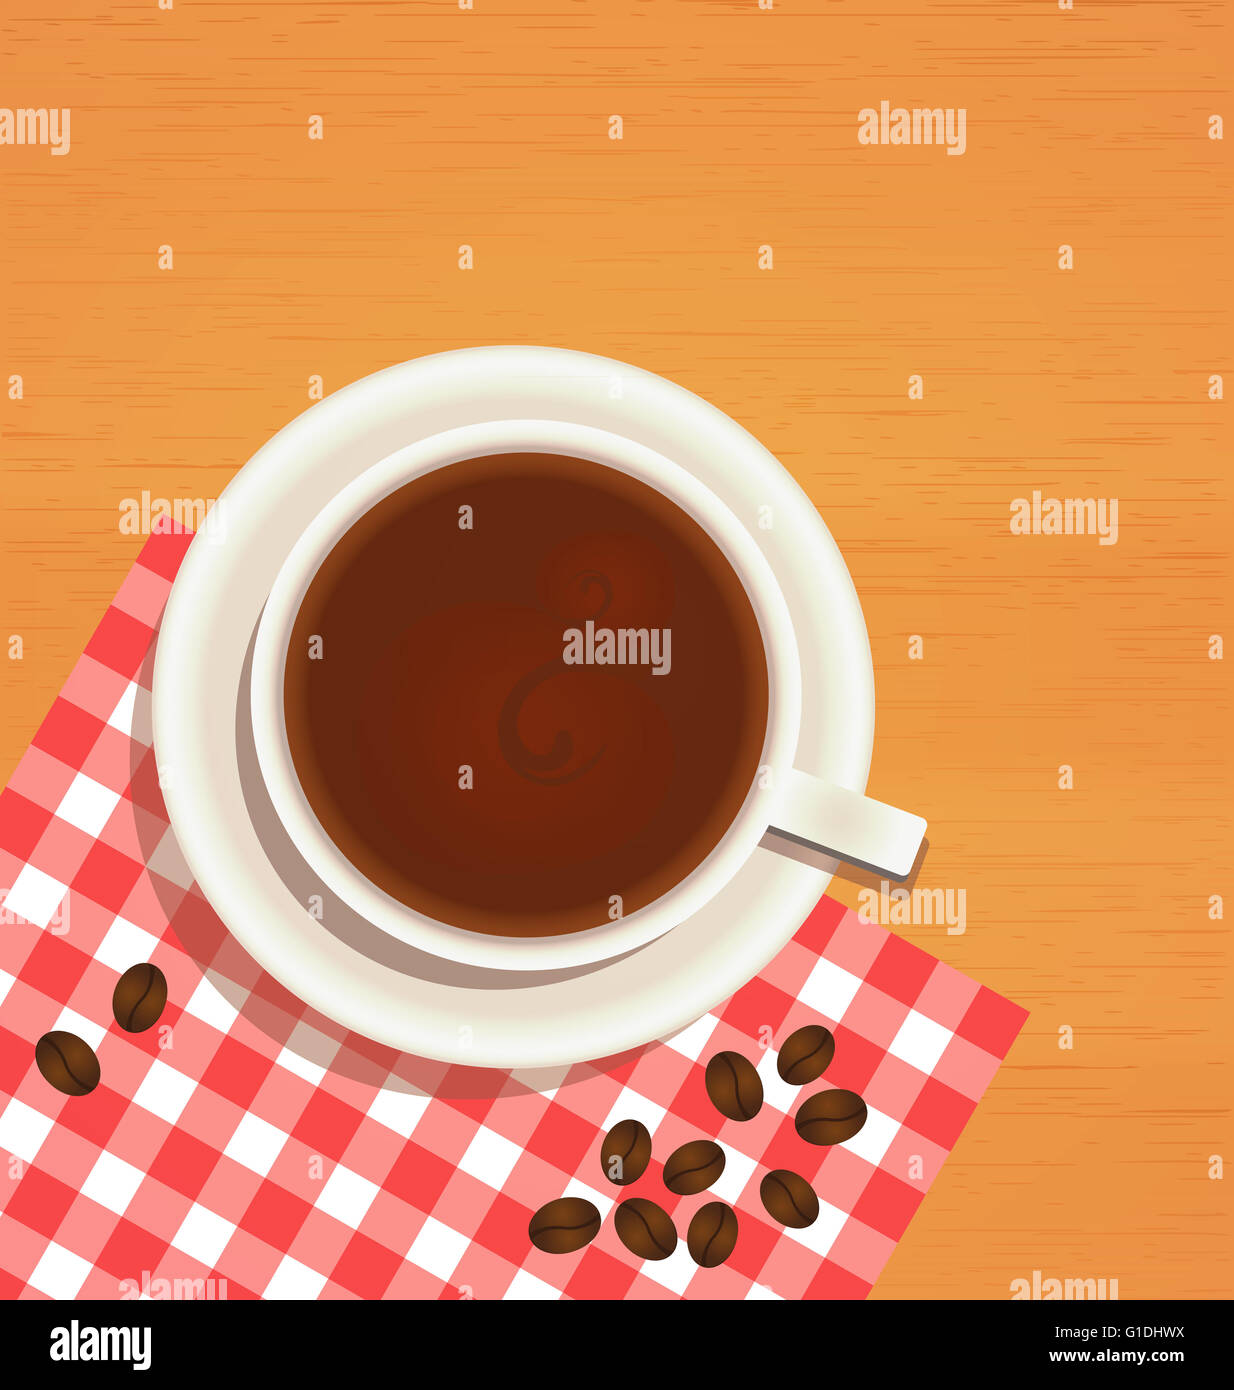 hi-res images morning Coffee Alamy - poster photography stock and